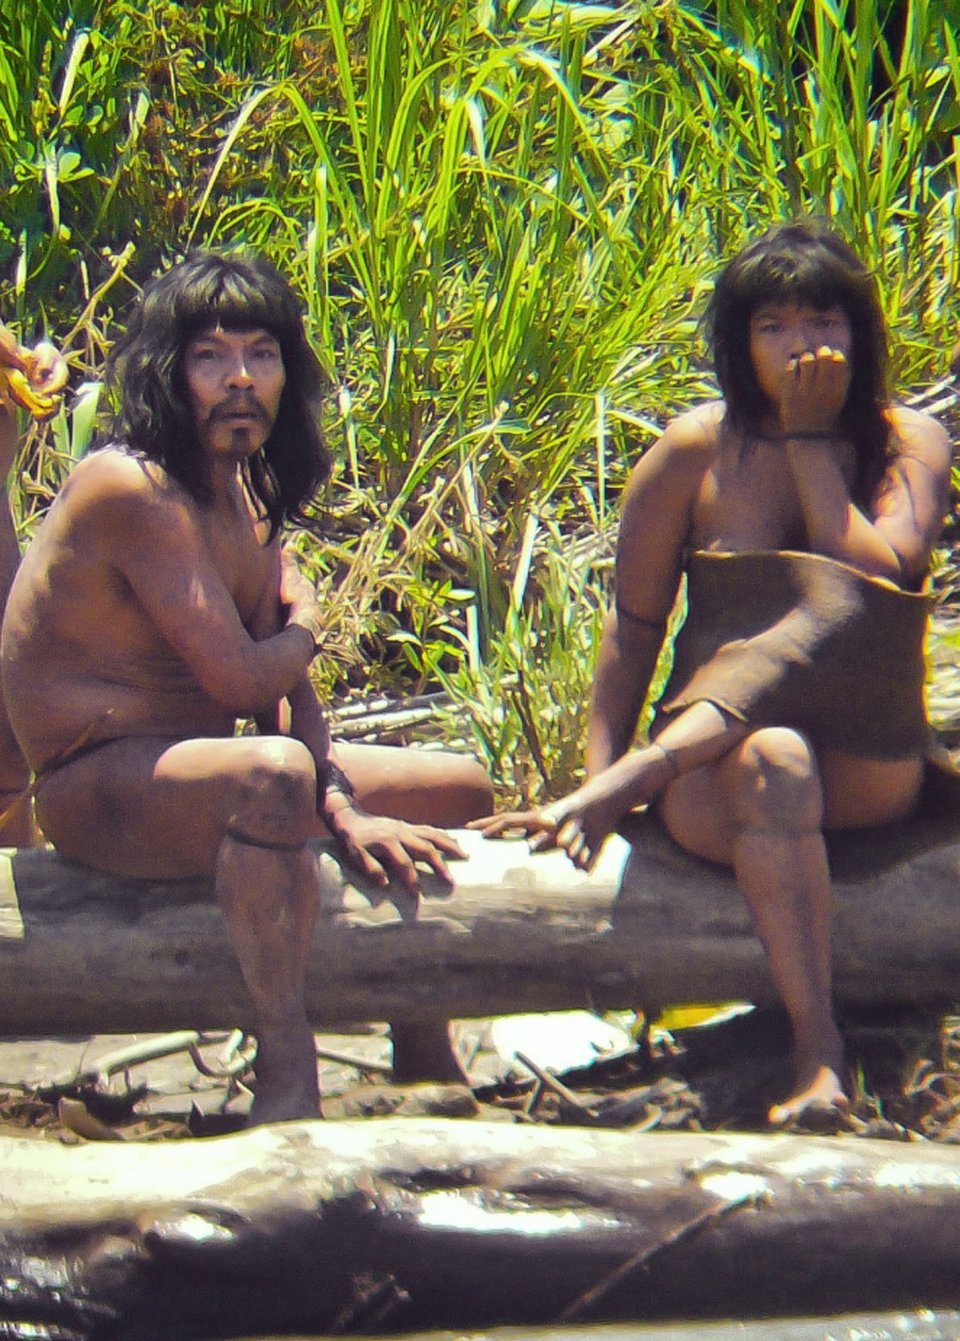 FILE - This Nov. 2011 file photo, shows members of the Mashco-Piro tribe, photographed at an undisclosed location near the Manu National Park in southeastern Peru. More than 100 Mashco-Piro appeared across a river from the remote community of Monte Salvado in Madre de Dios state, says Klaus Quicque the president of the regional FENAMAD indigenous federation on Monday, Aug. 19, 2013. The Maschco-Piro first appeared in May 2011 after more than two decades in voluntary isolation. (AP Photo/Diego Cortijo, Survival International, File)